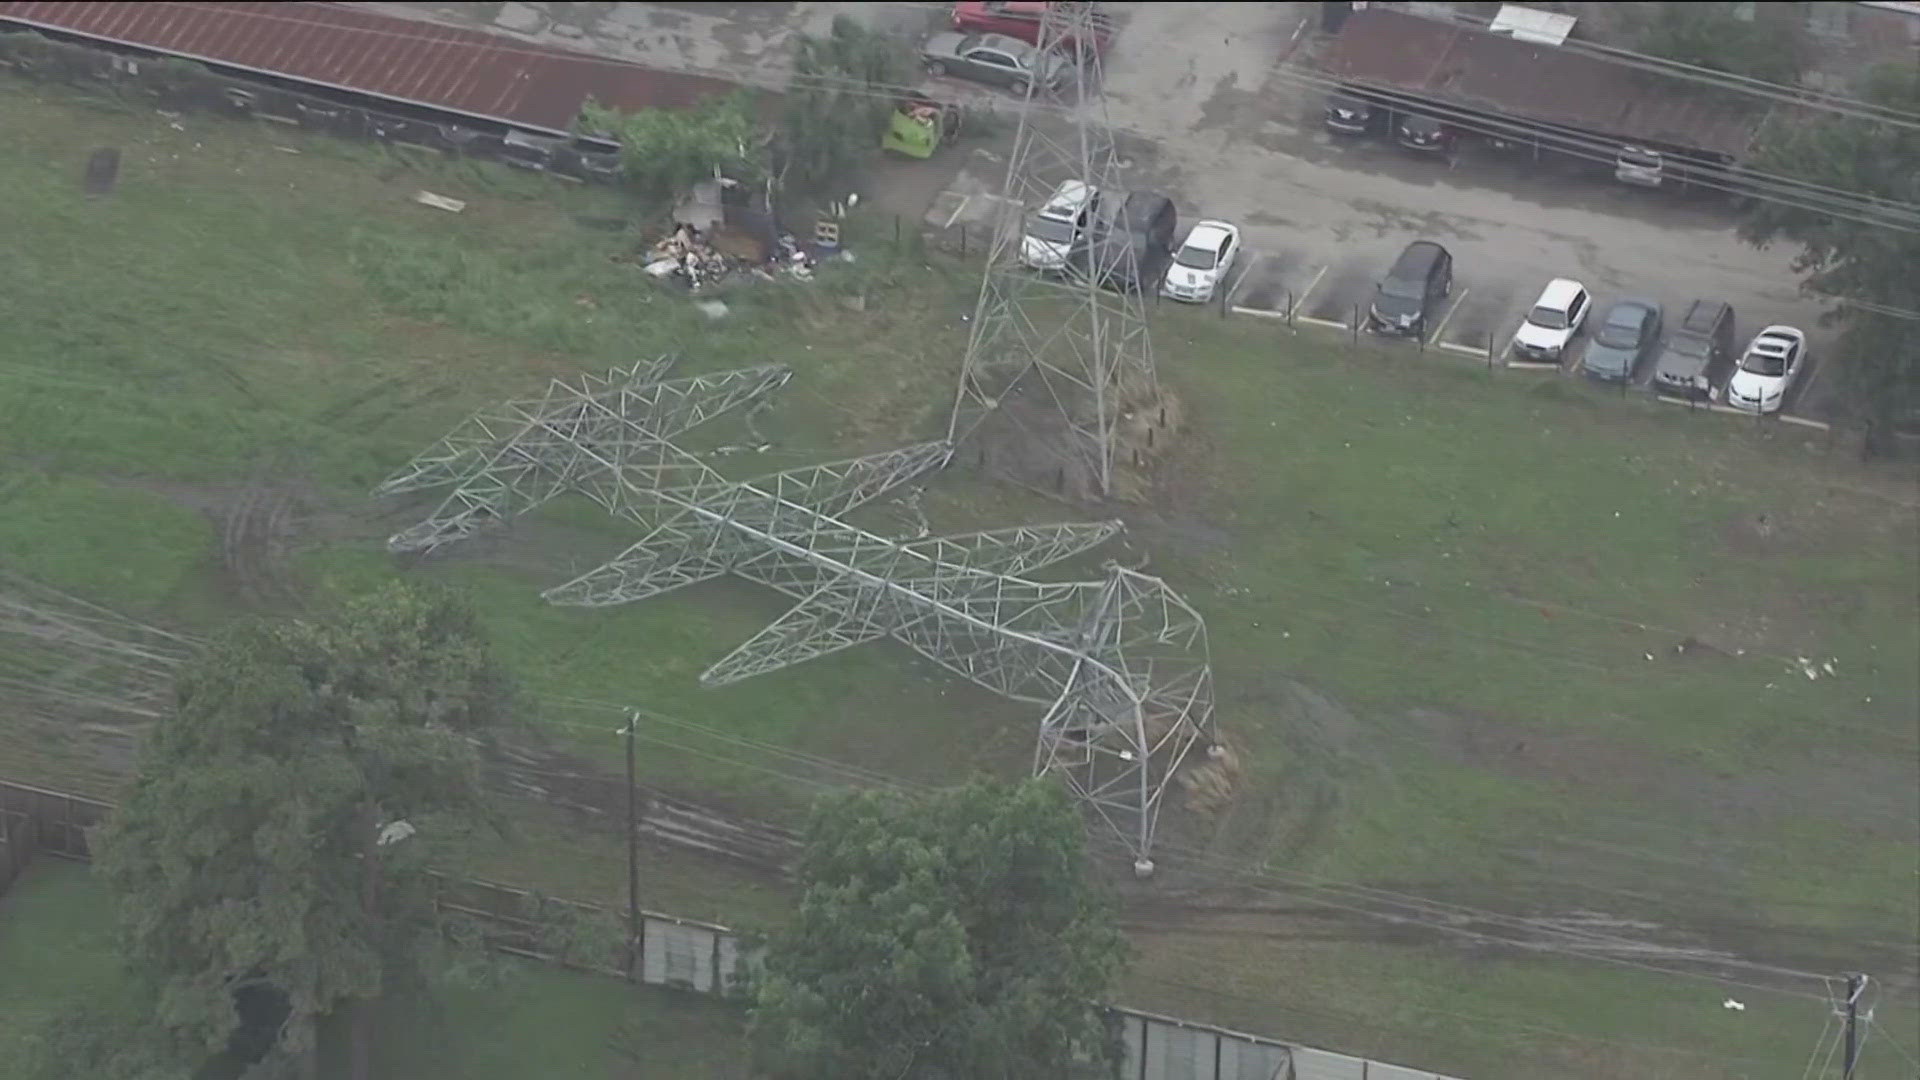 Houston officials say they expect power to be restored by the end of the night.